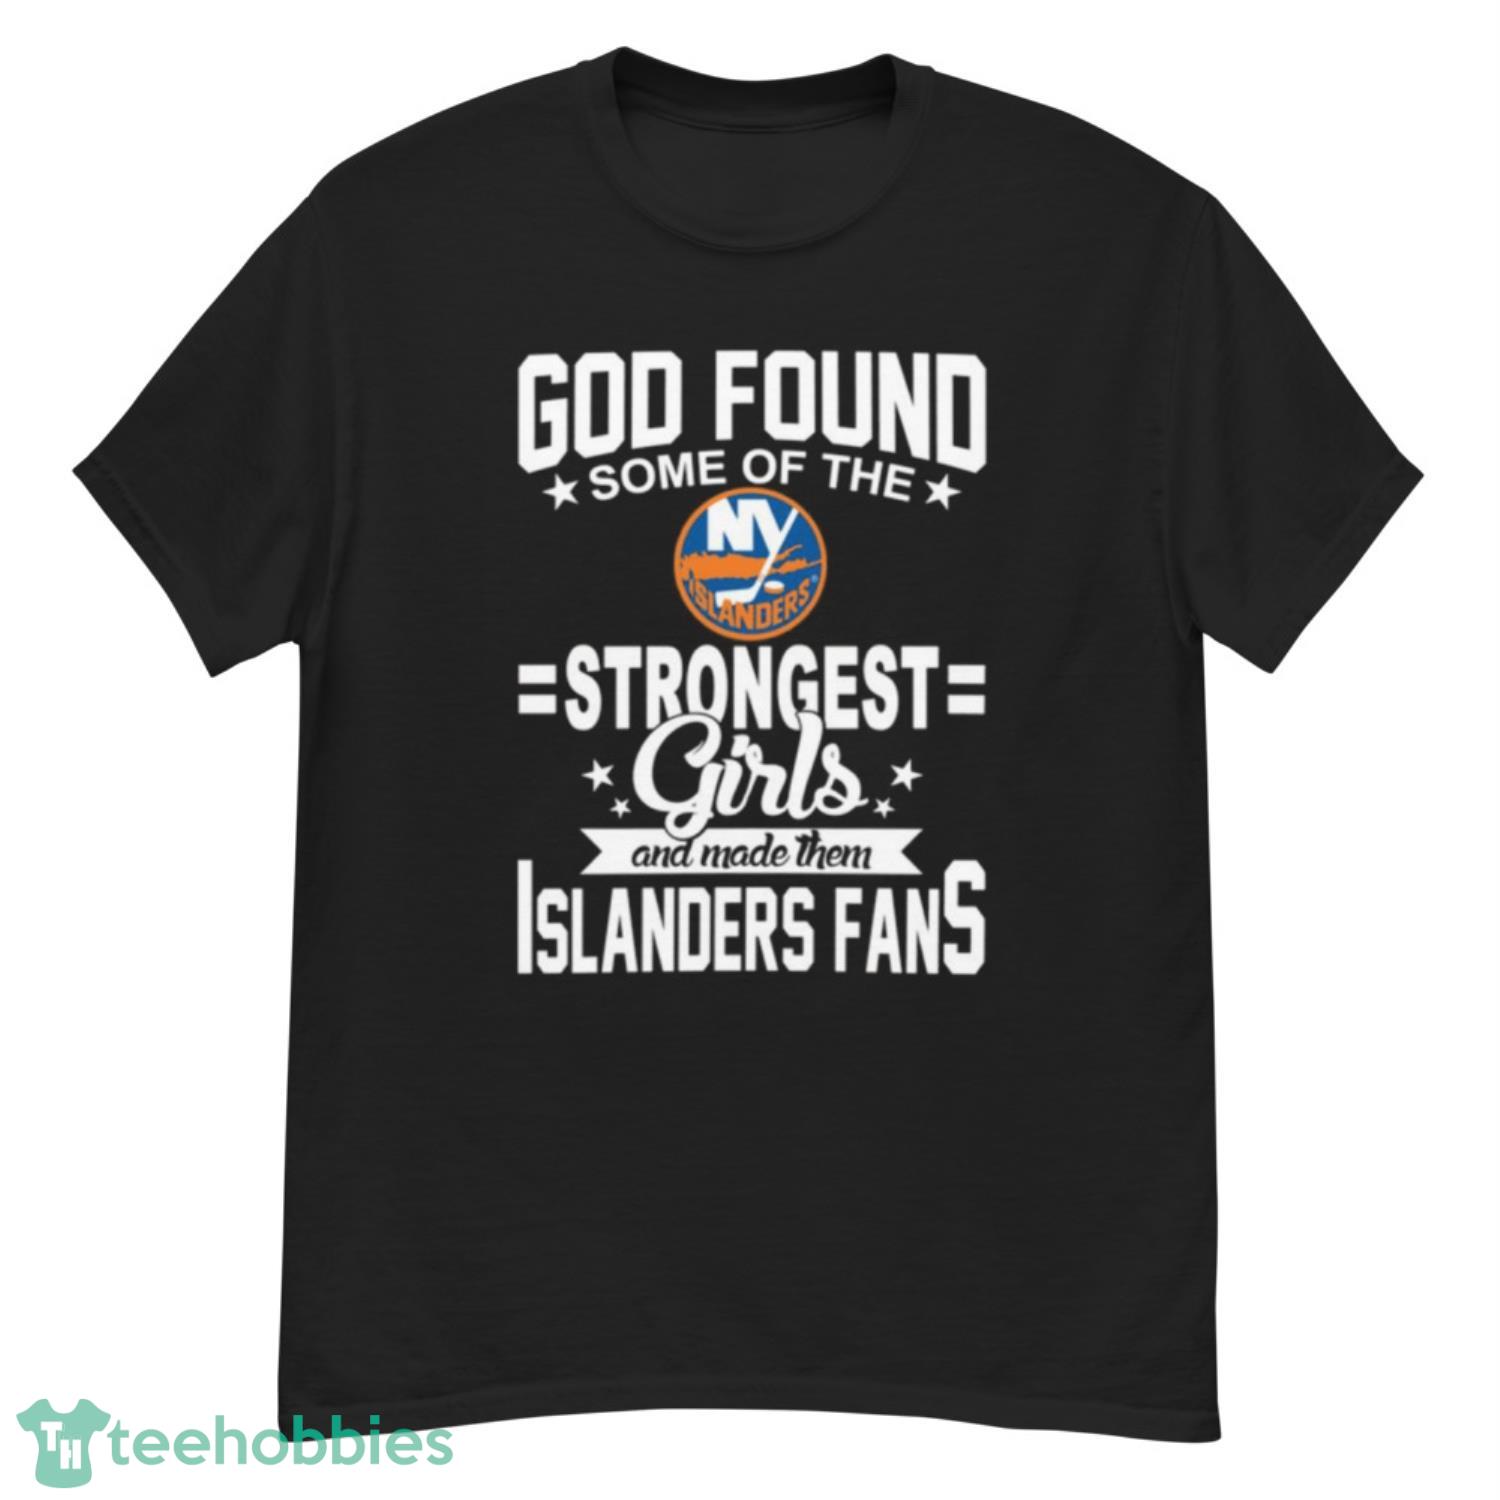 New York Islanders NHL Football God Found Some Of The Strongest Girls Adoring Fans T Shirt - G500 Men’s Classic T-Shirt